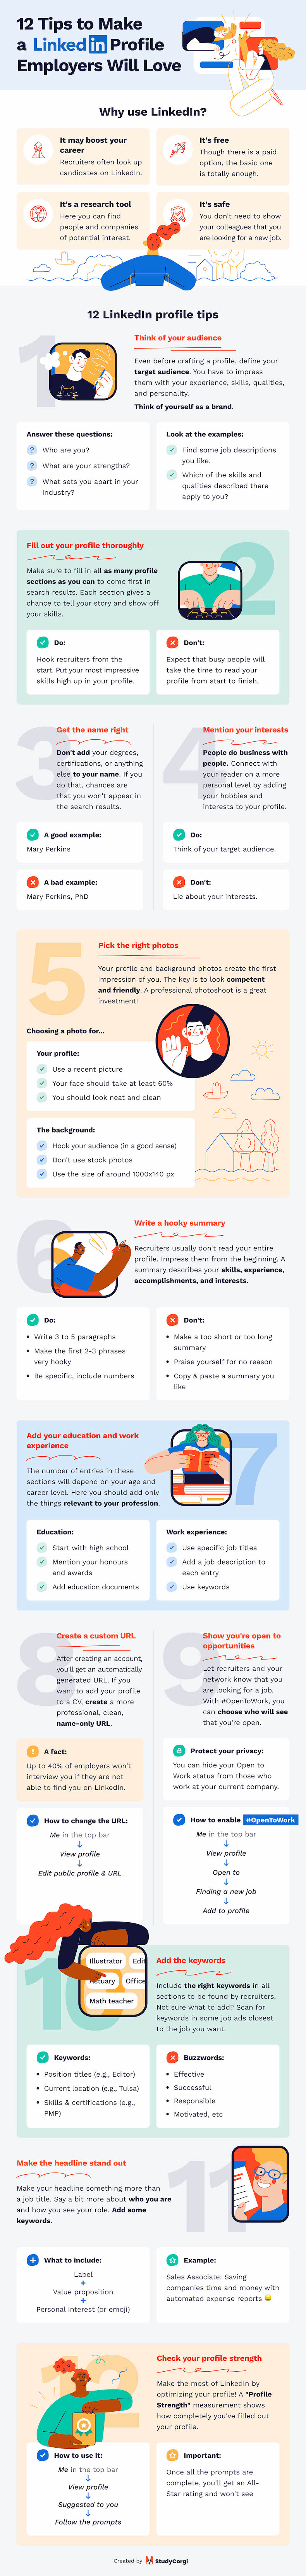 12 tips for making a LinkedIn profile employers will love infographic